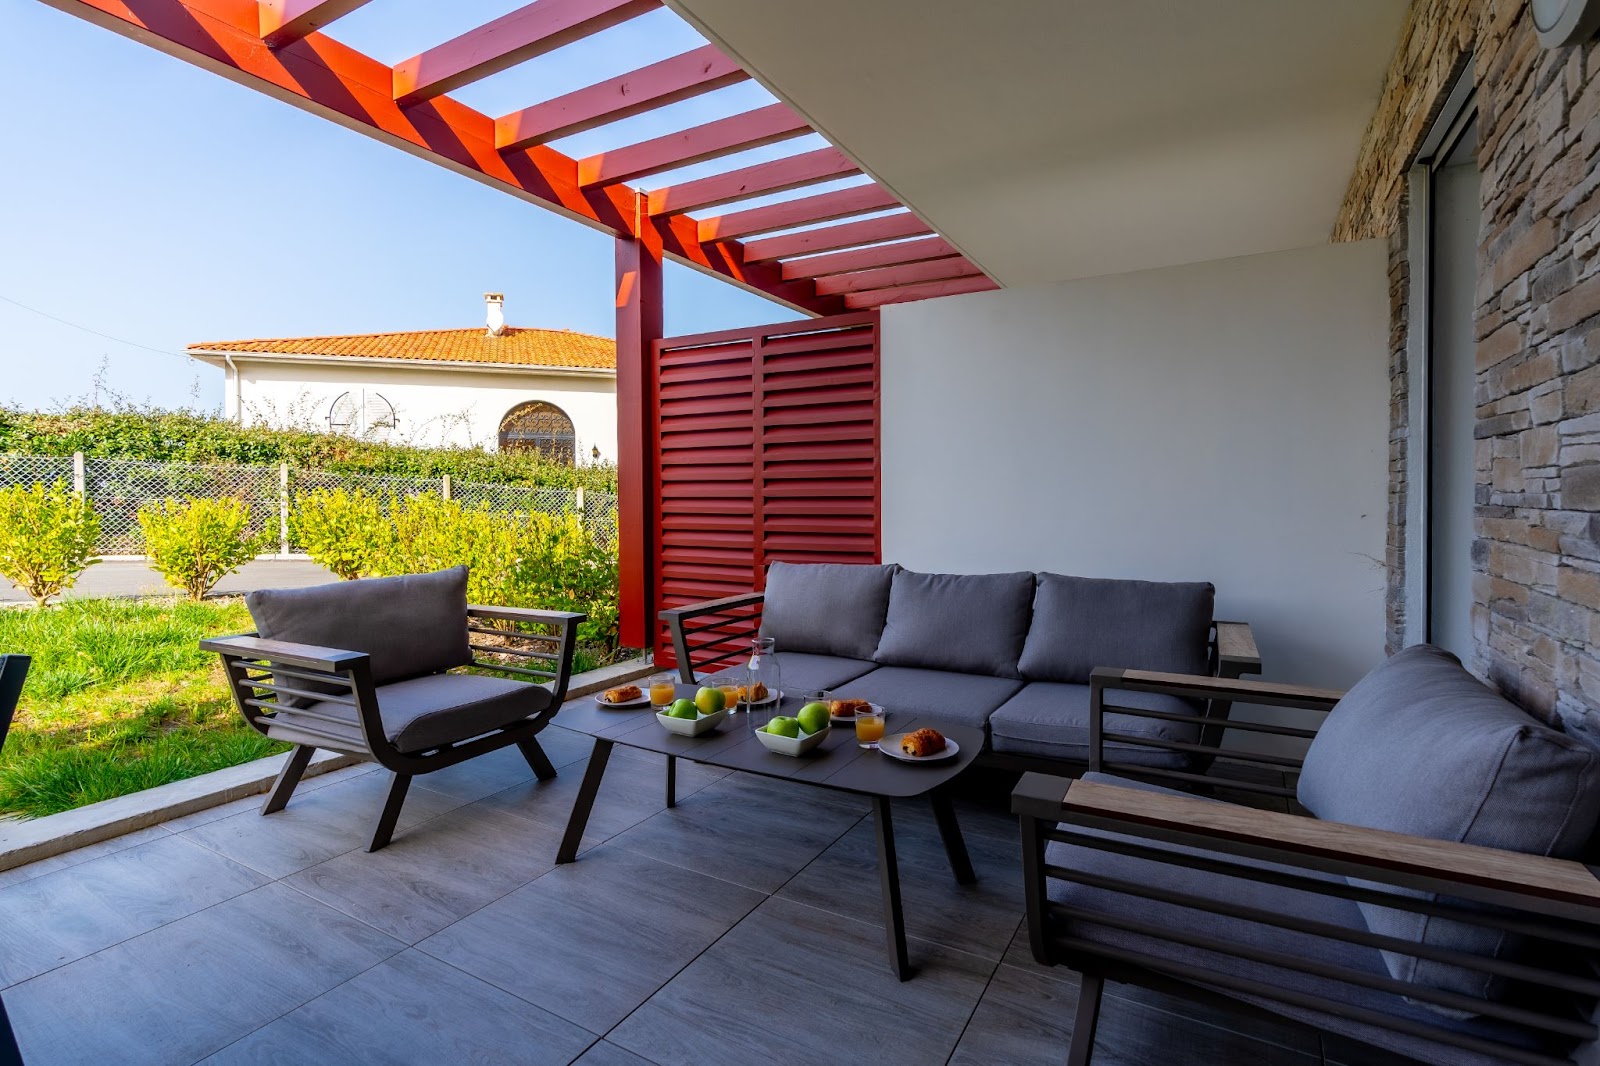  An outdoor wooden deck with chairs and a coffee table with fruit on top.